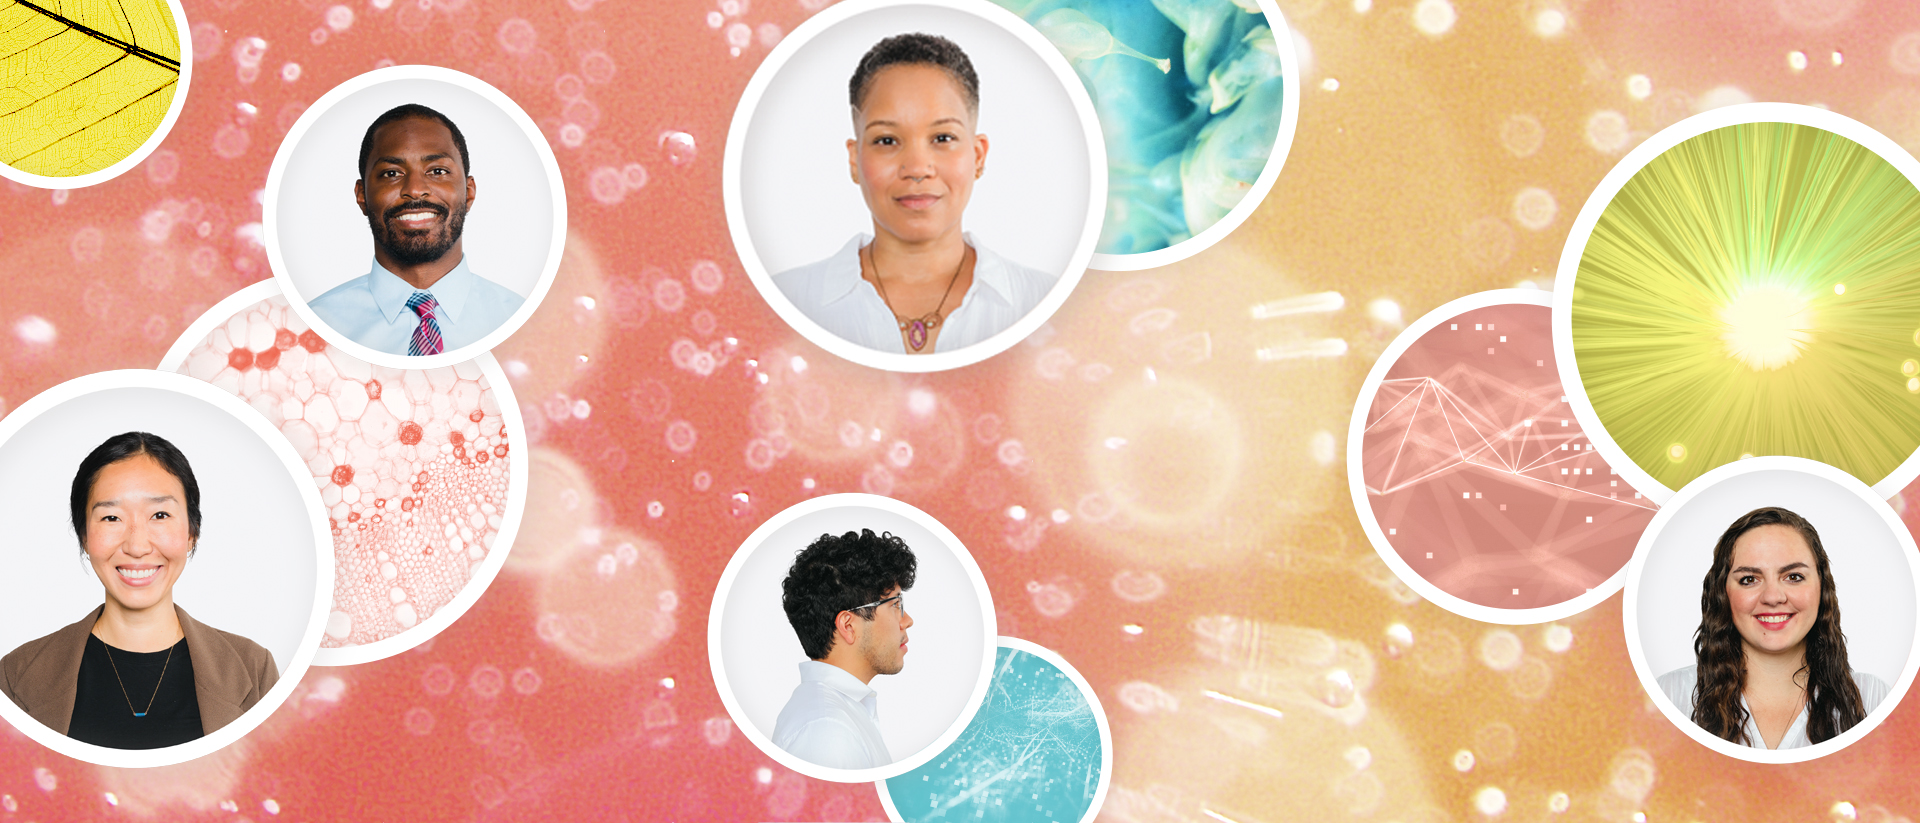 Five Emory students photos cropped into circles and placed on a colorful pink background